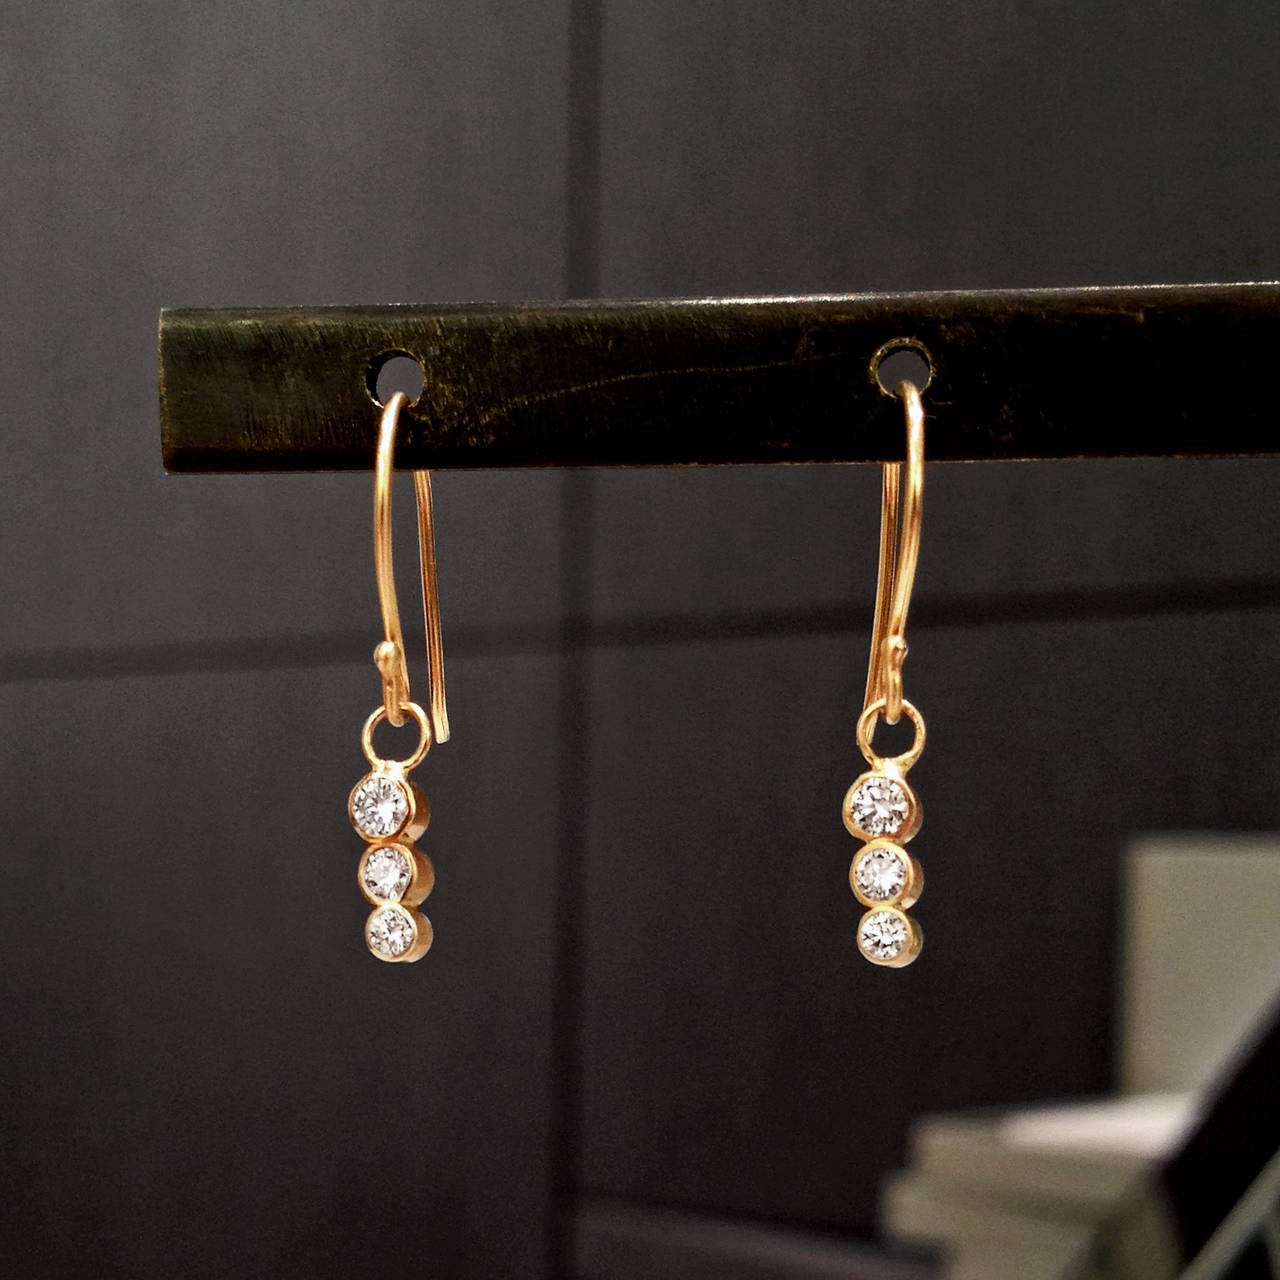 Dangle Earrings handcrafted in 14k yellow gold with six round, brilliant-cut white diamonds descending in size. Incredible sparkle!